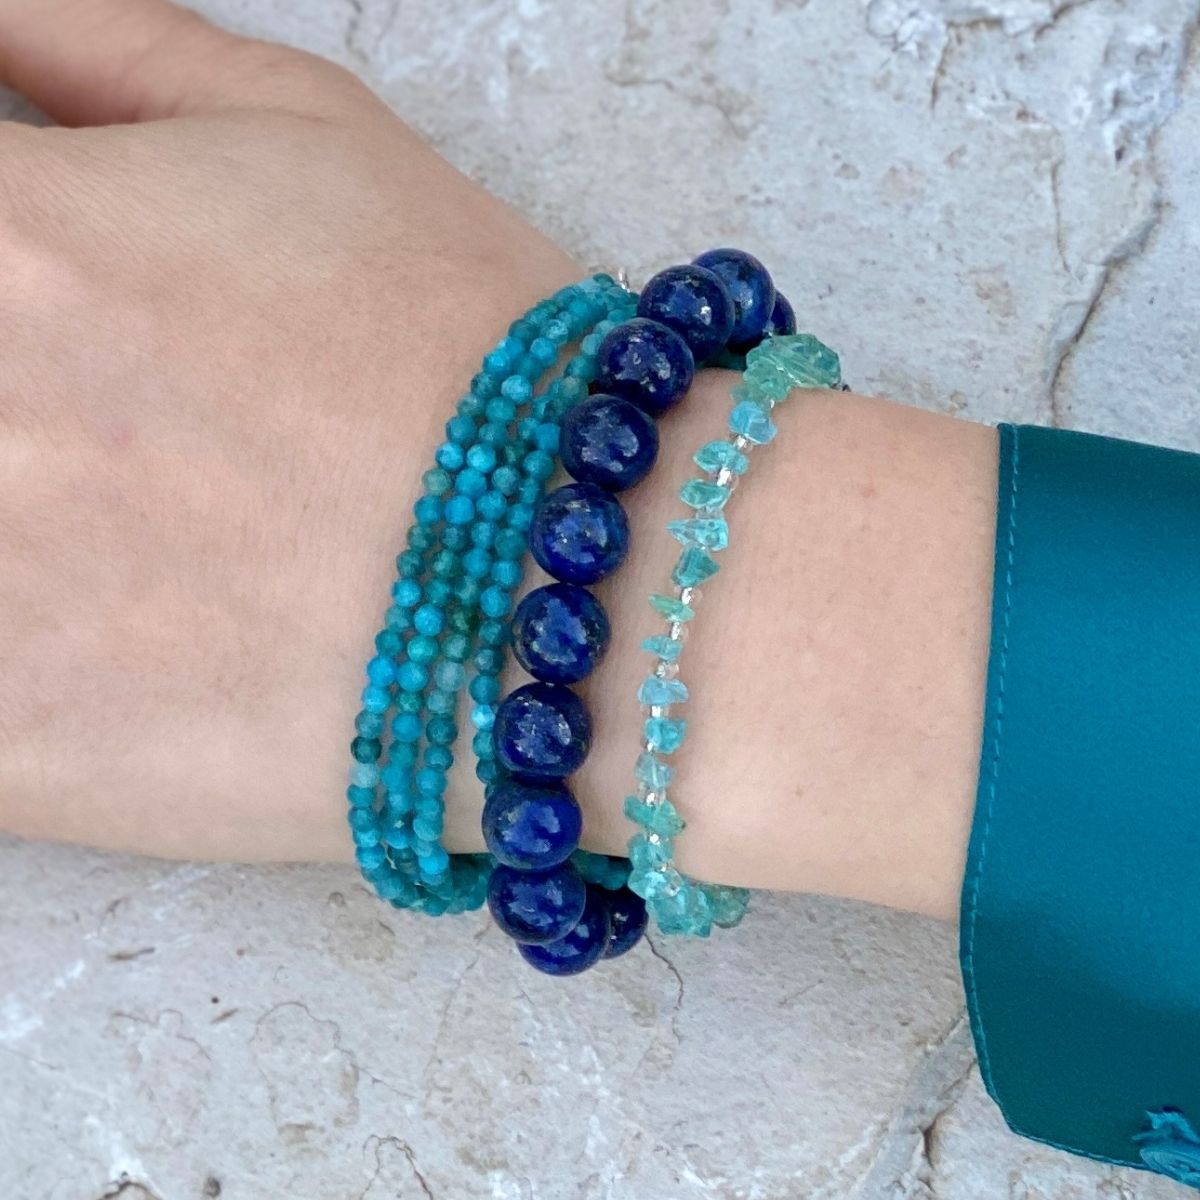 Fresh Start Bracelet Stack. “Every day is a new opportunity to begin again. Every day is your birthday.” —Dalai Lama. Although no one can go back and make a brand new start, anyone can start from now and make a brand new ending. Wear these healing crystals for a fresh start!